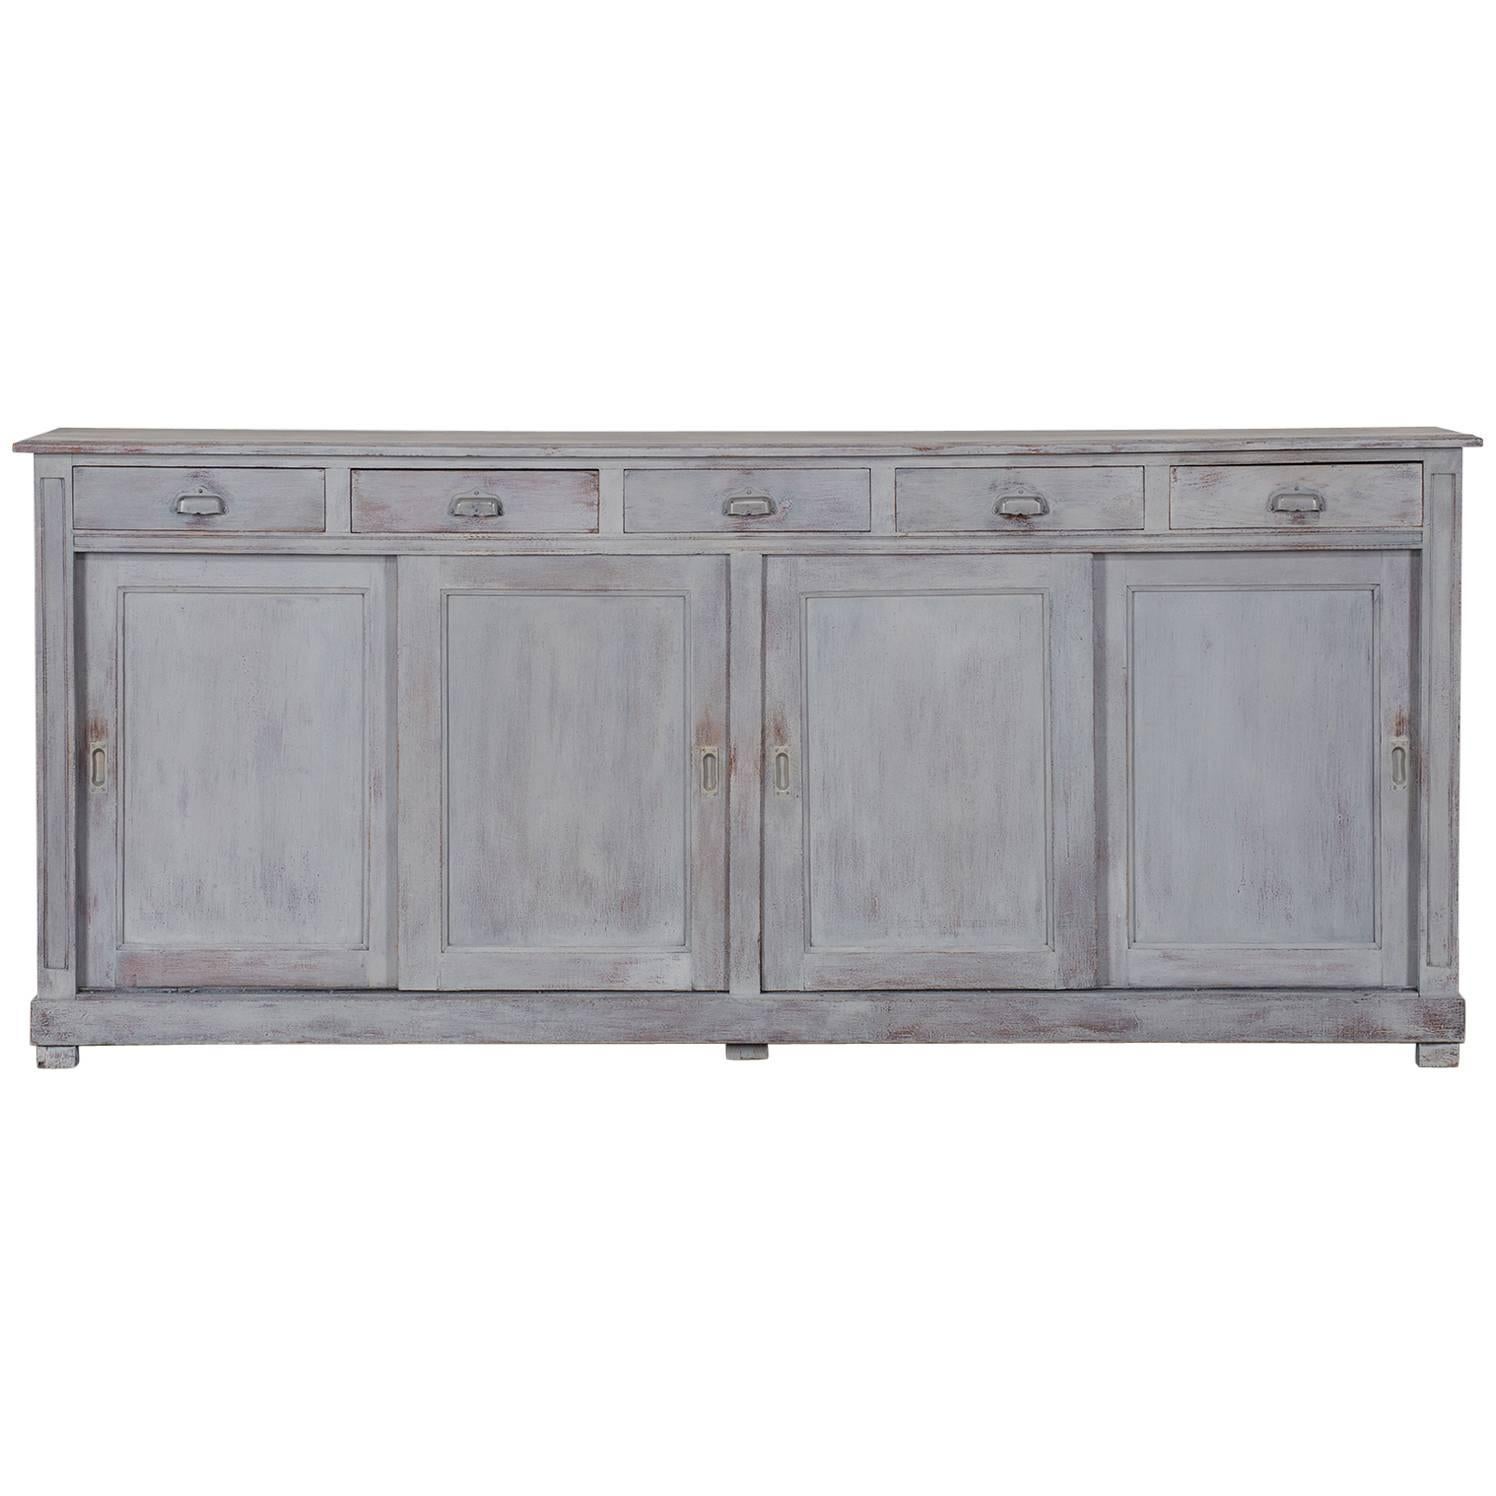 Antique French Painted Shop Buffet Credenza, circa 1890